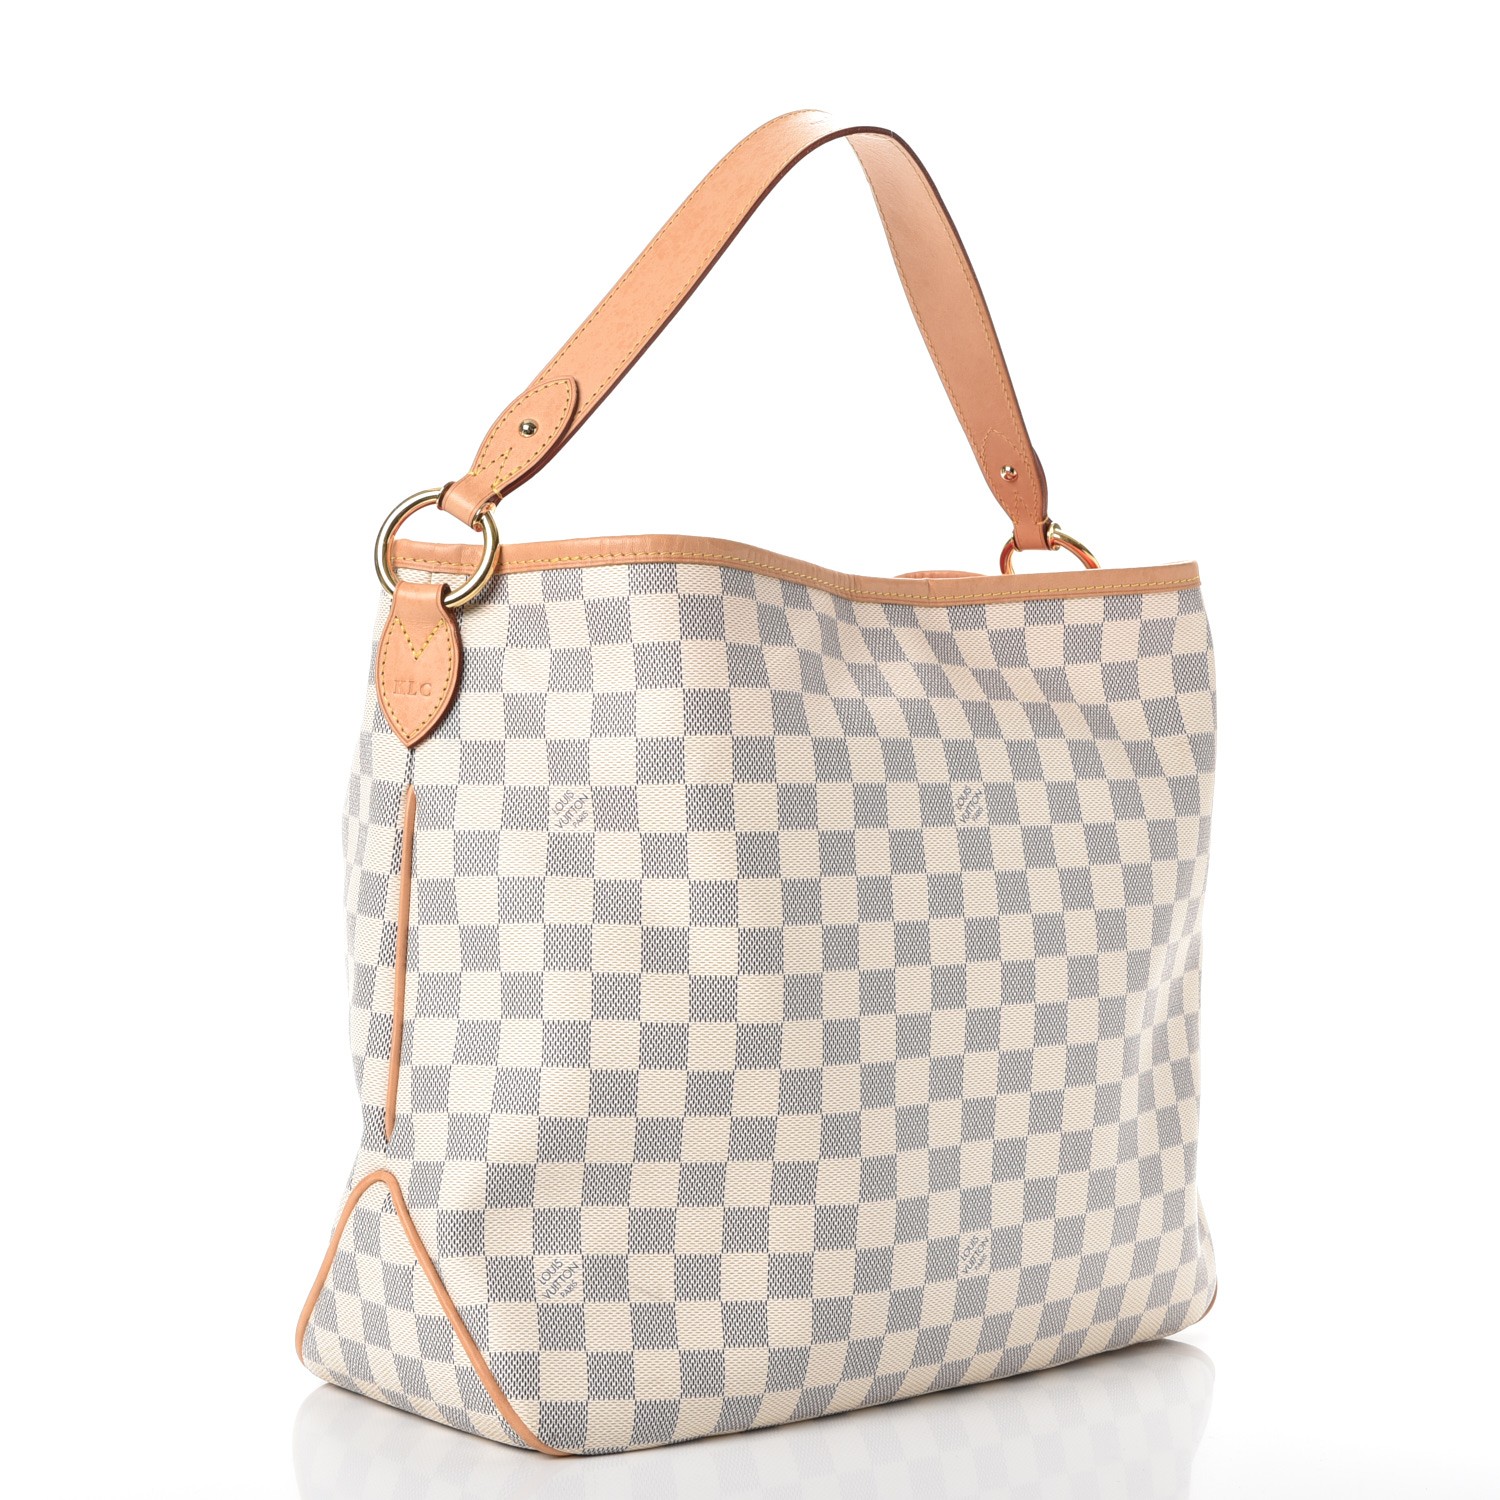 Louis Vuitton Rose Ballerine and Damier Azur Coated Canvas Studded City Pouch Gold Hardware, 2019 (Like New), Beige/White/Blue Womens Handbag